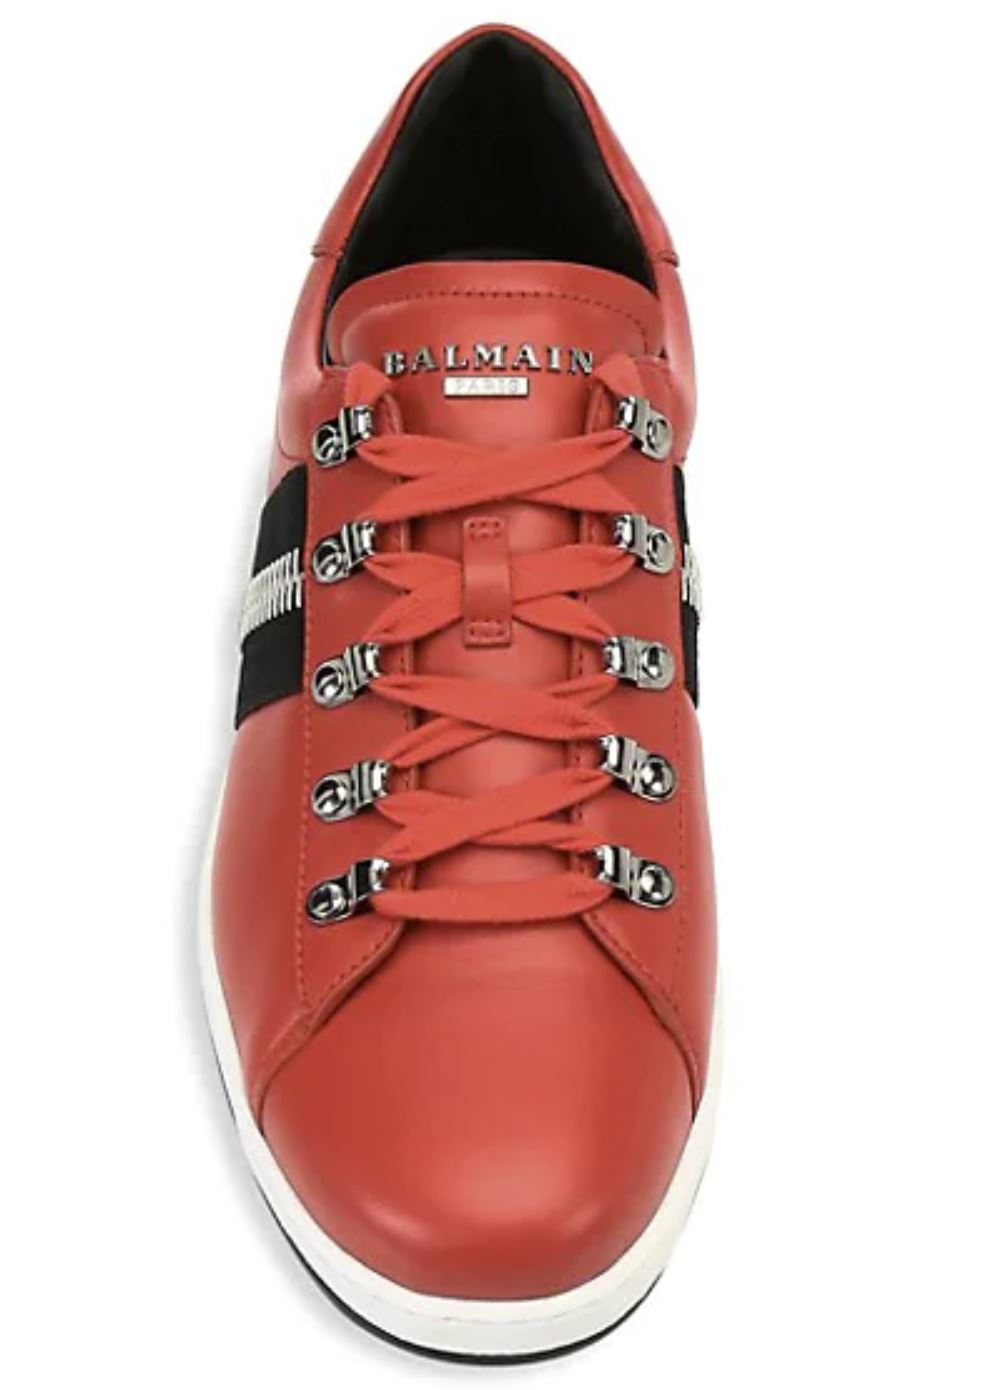 New $695 Balmain Lace-Up Low-Top Leather Sneakers Red 9 US/42 Euro Italy